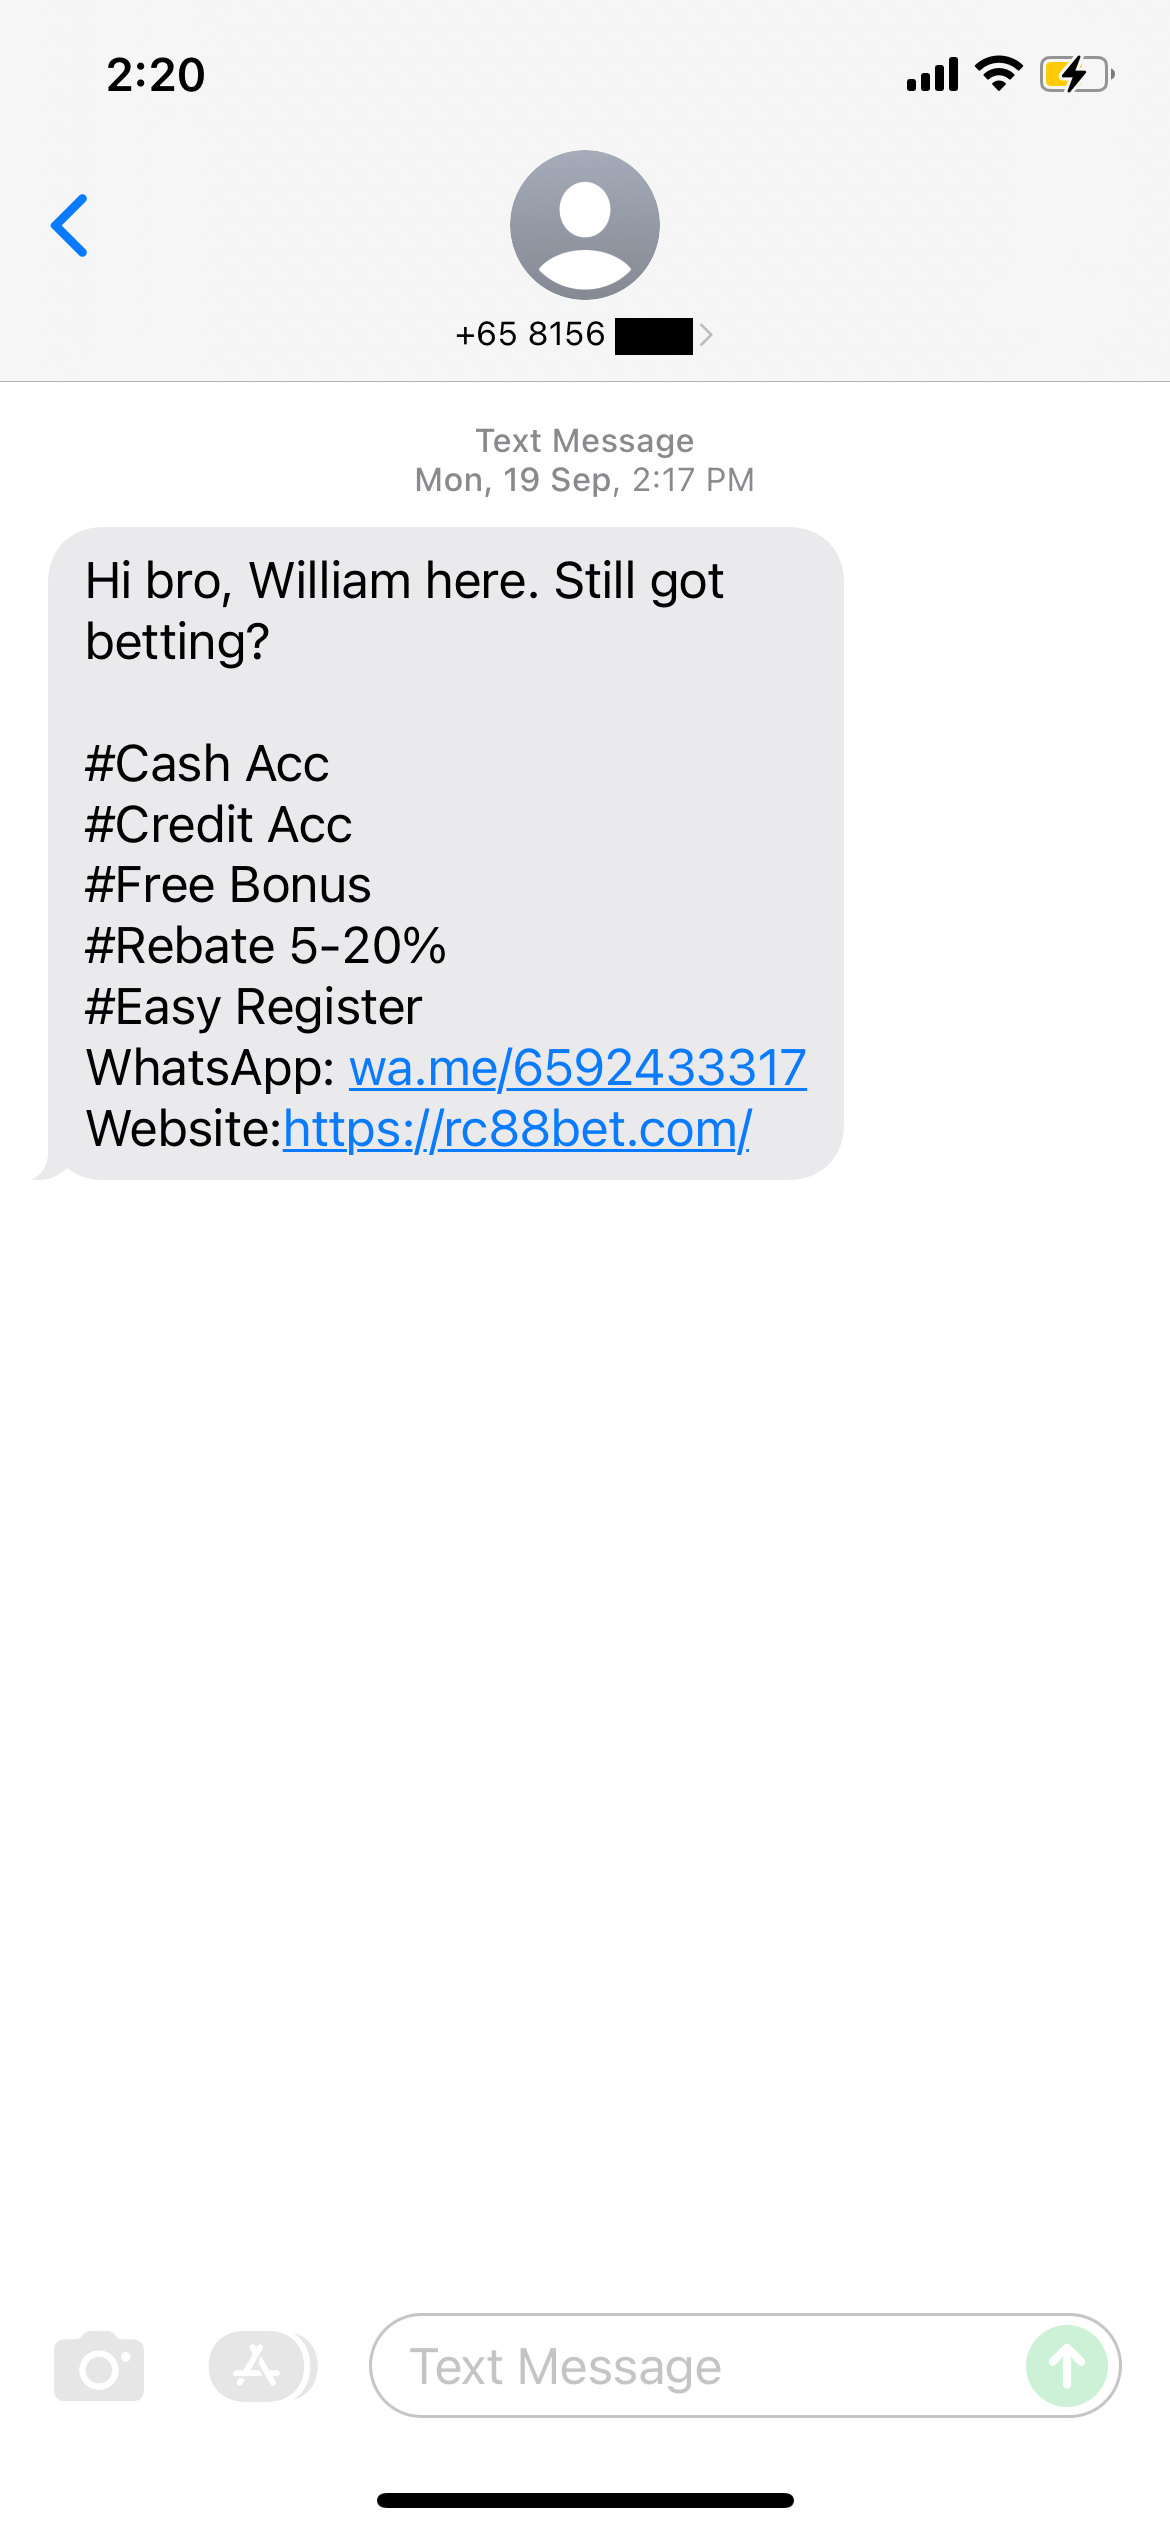 Example of a scam SMS